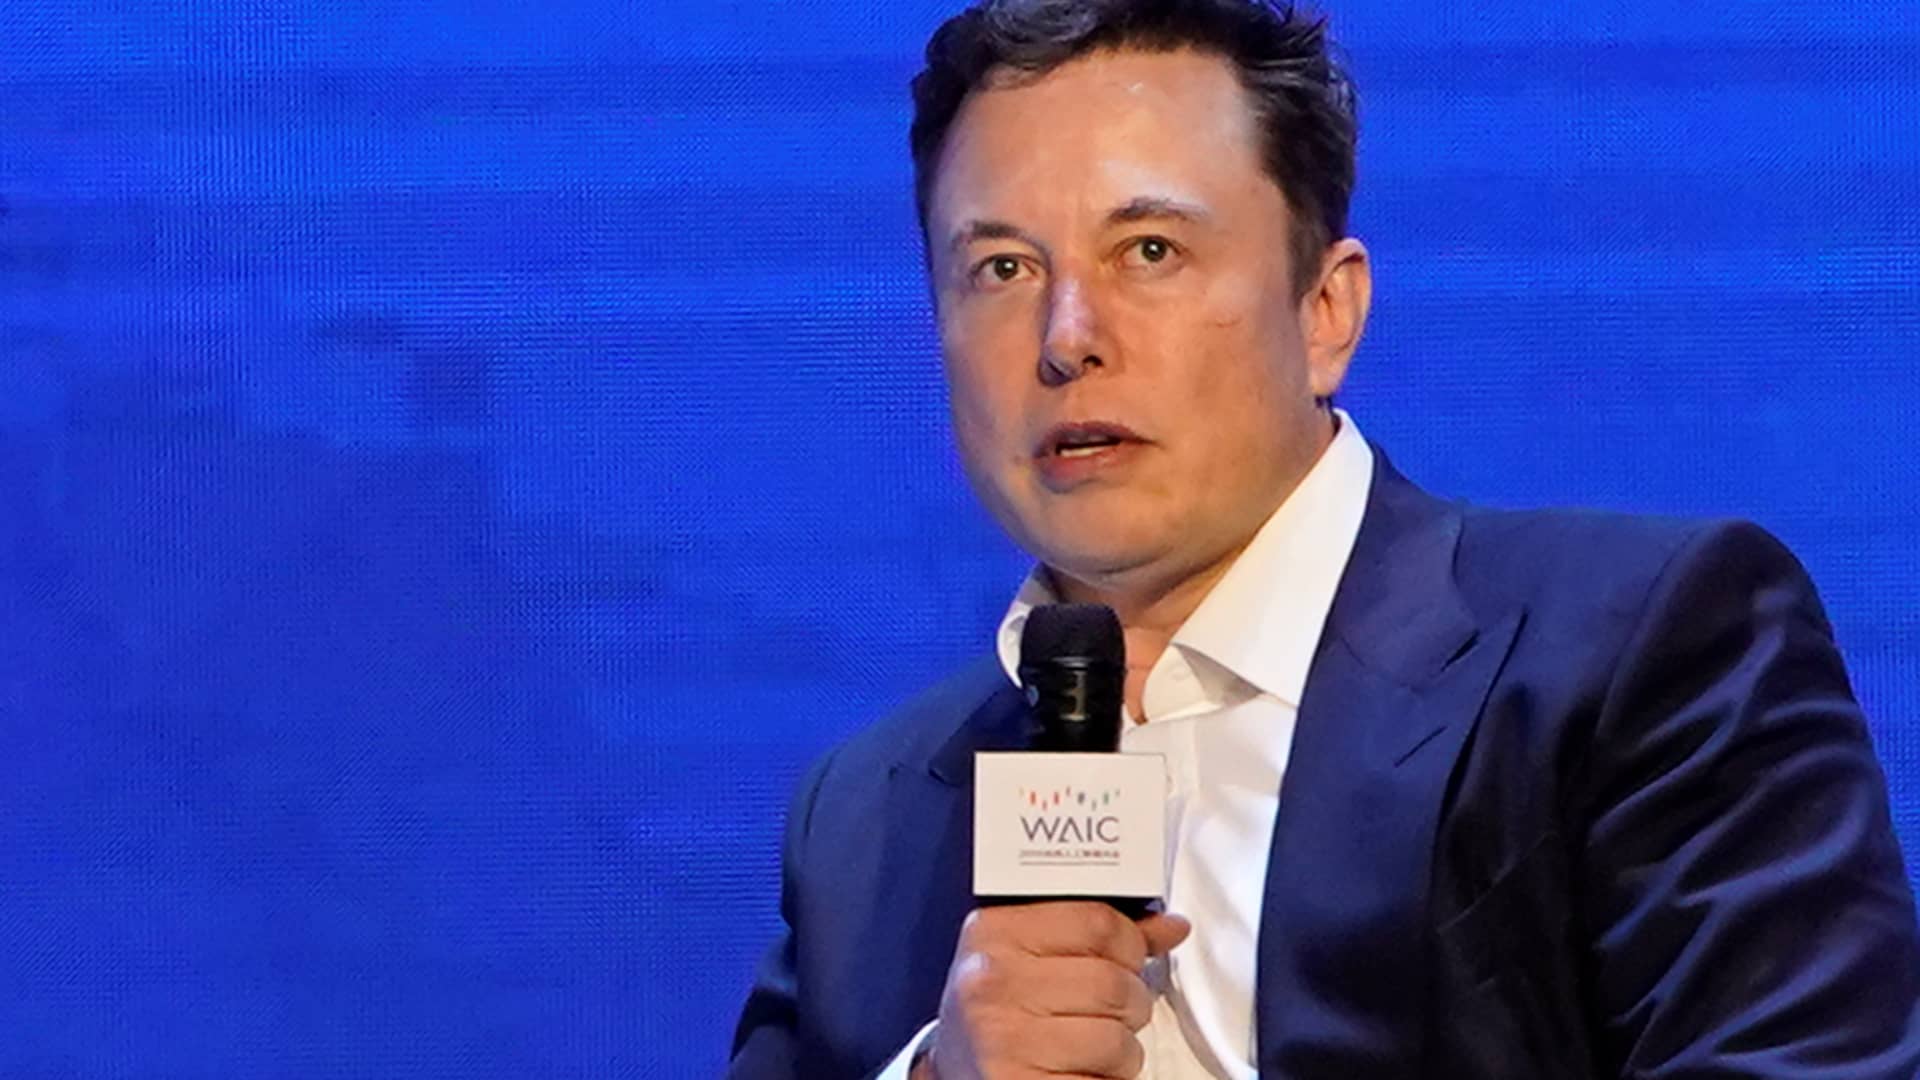 Elon Musk says he thinks inflation is worse than reported and likely to continue..